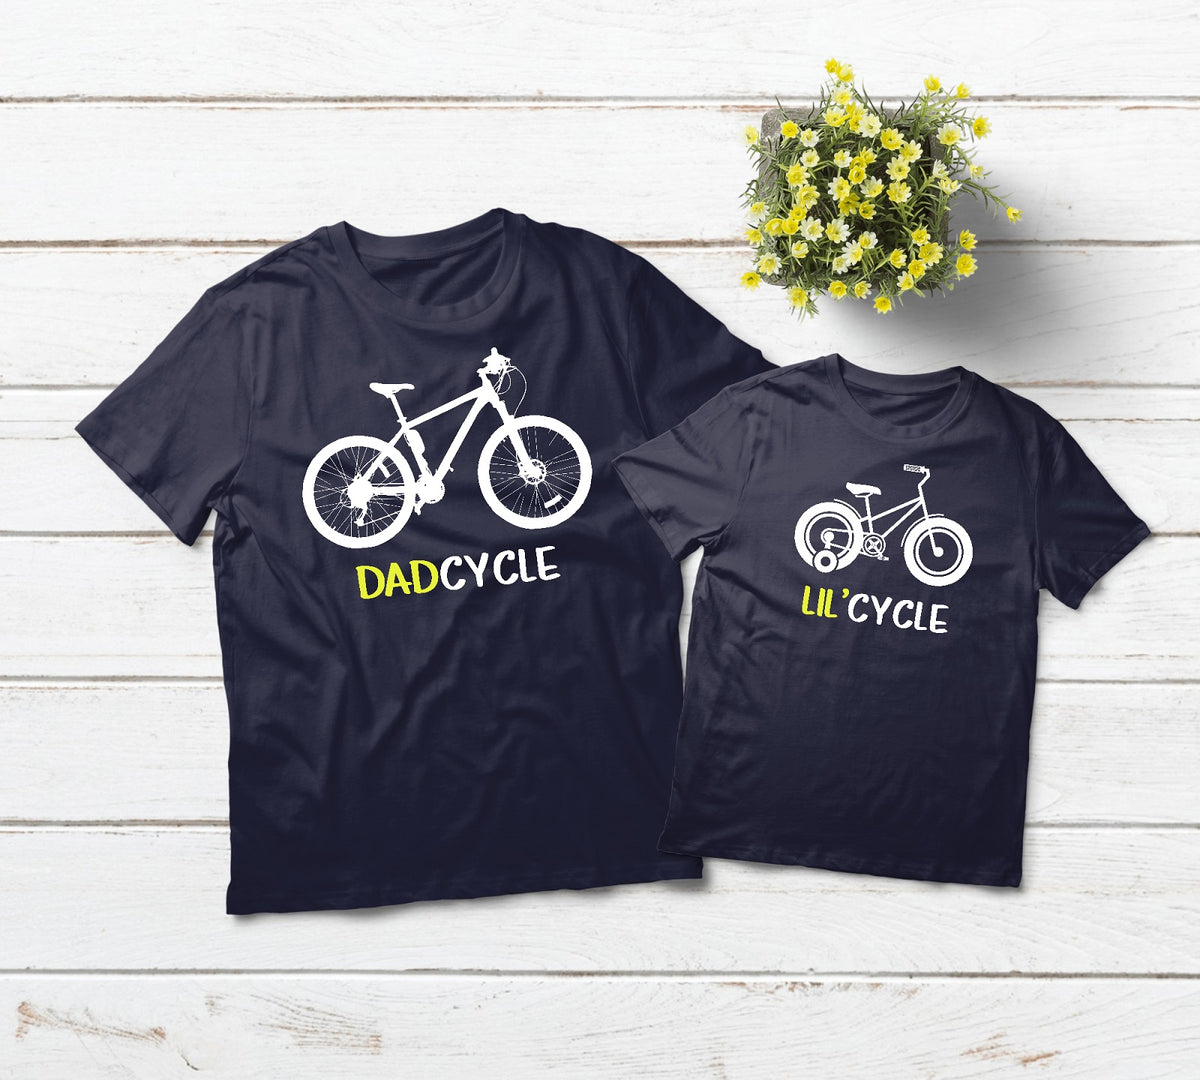 Father Son Matching Shirts Bicycle Daddy and Me Outfits Cycling Gift –  Matchizz